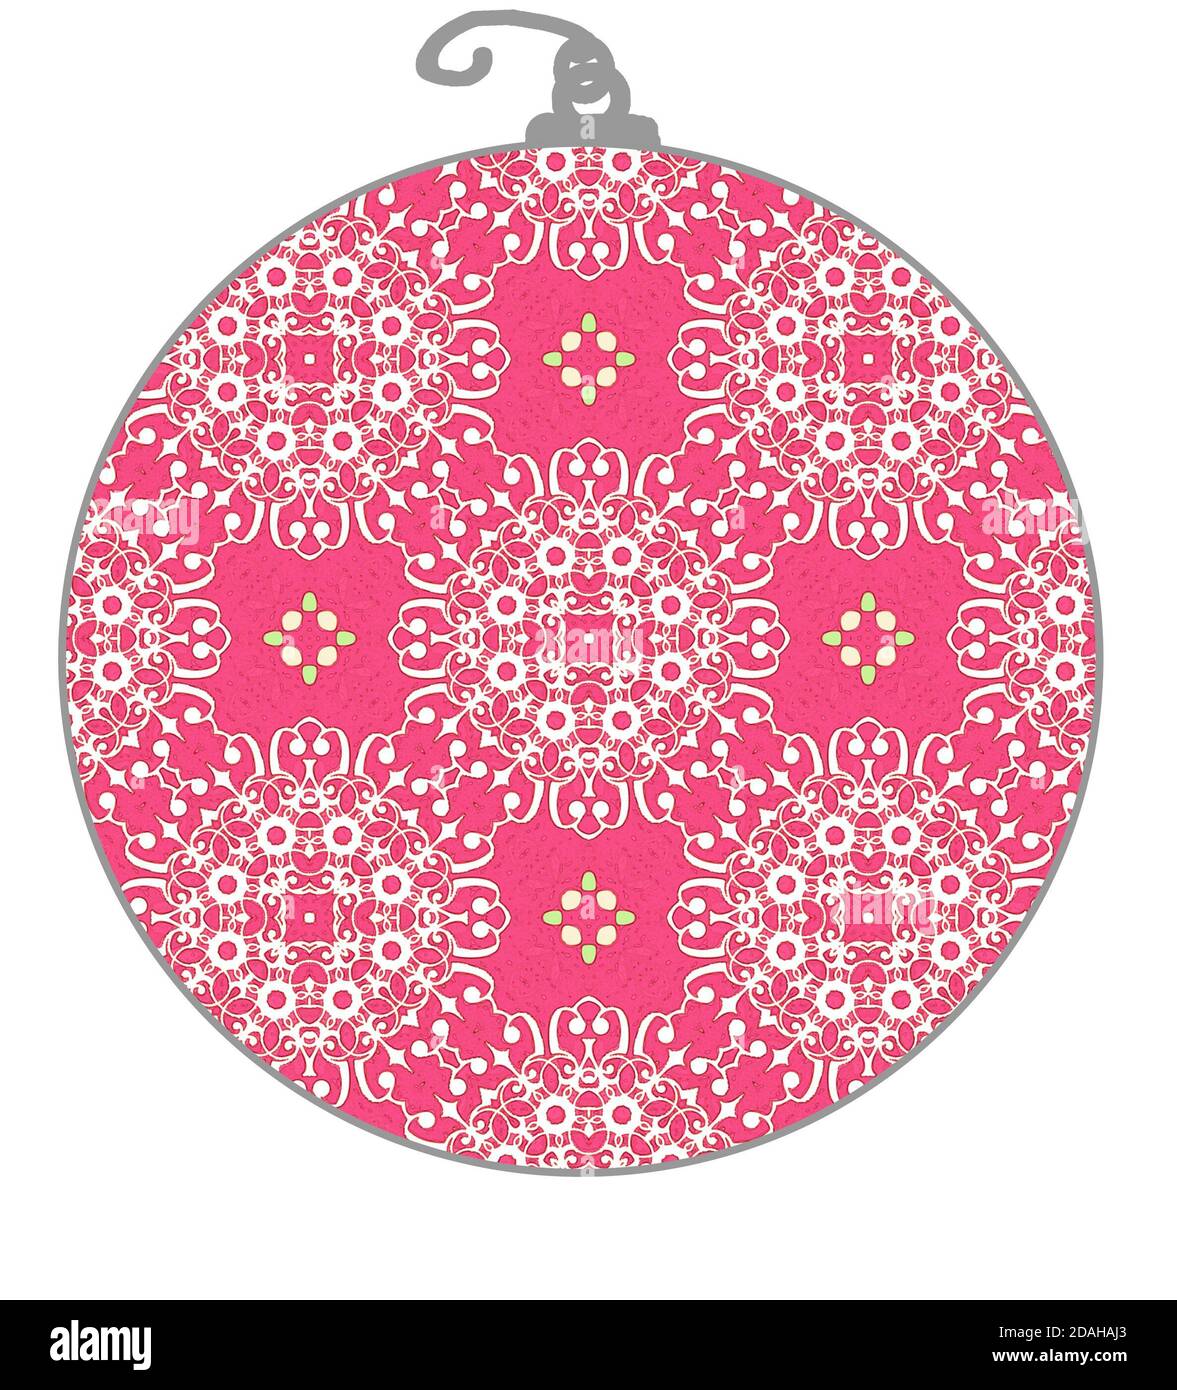 Pink lacey Christmas decoration traditional ornament style illustration Stock Photo